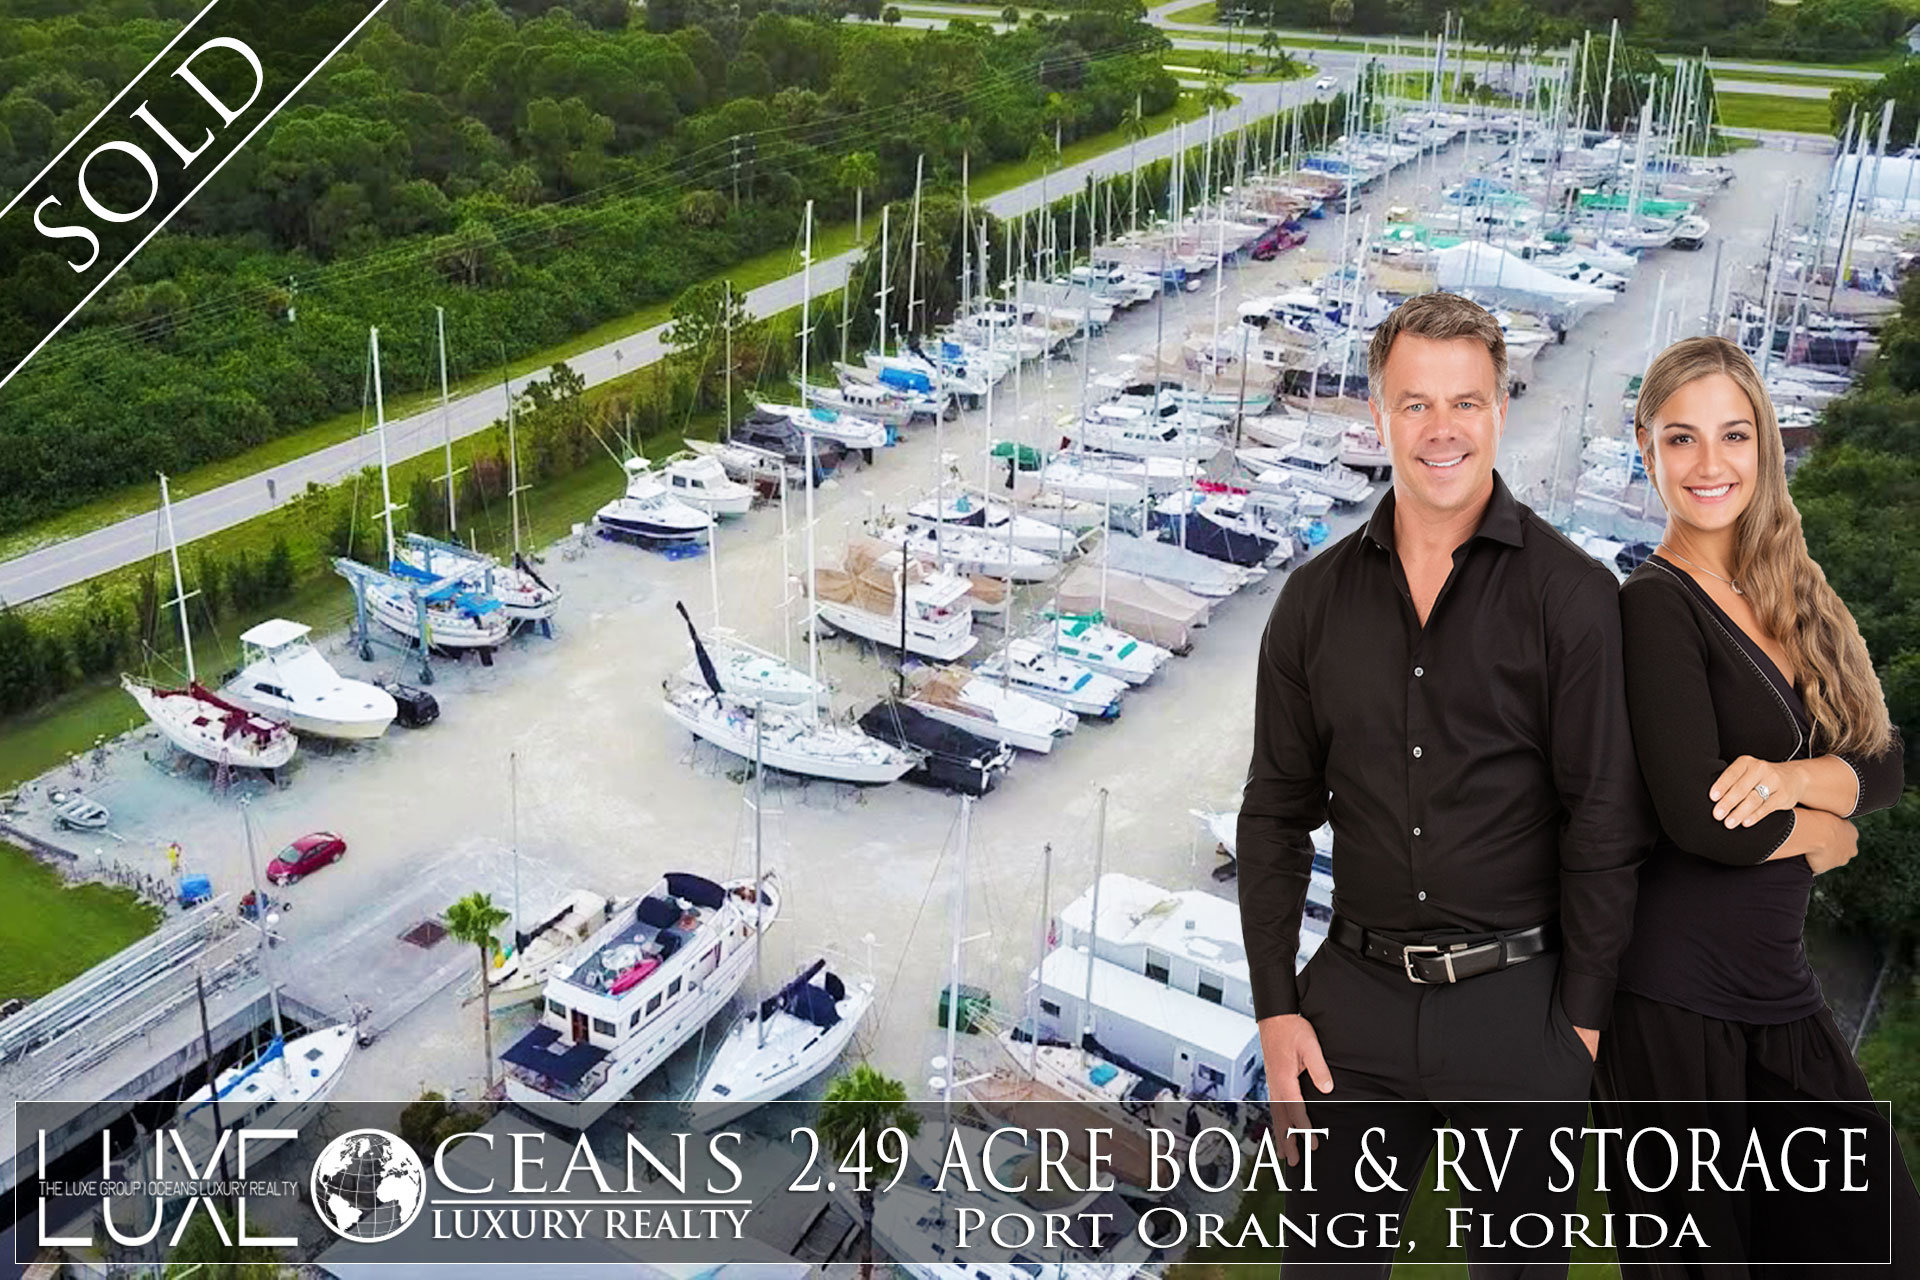 Commercial Land Mix Use Boat RV Storage Site For Sale in Port Orange, FL. Now Under Contract